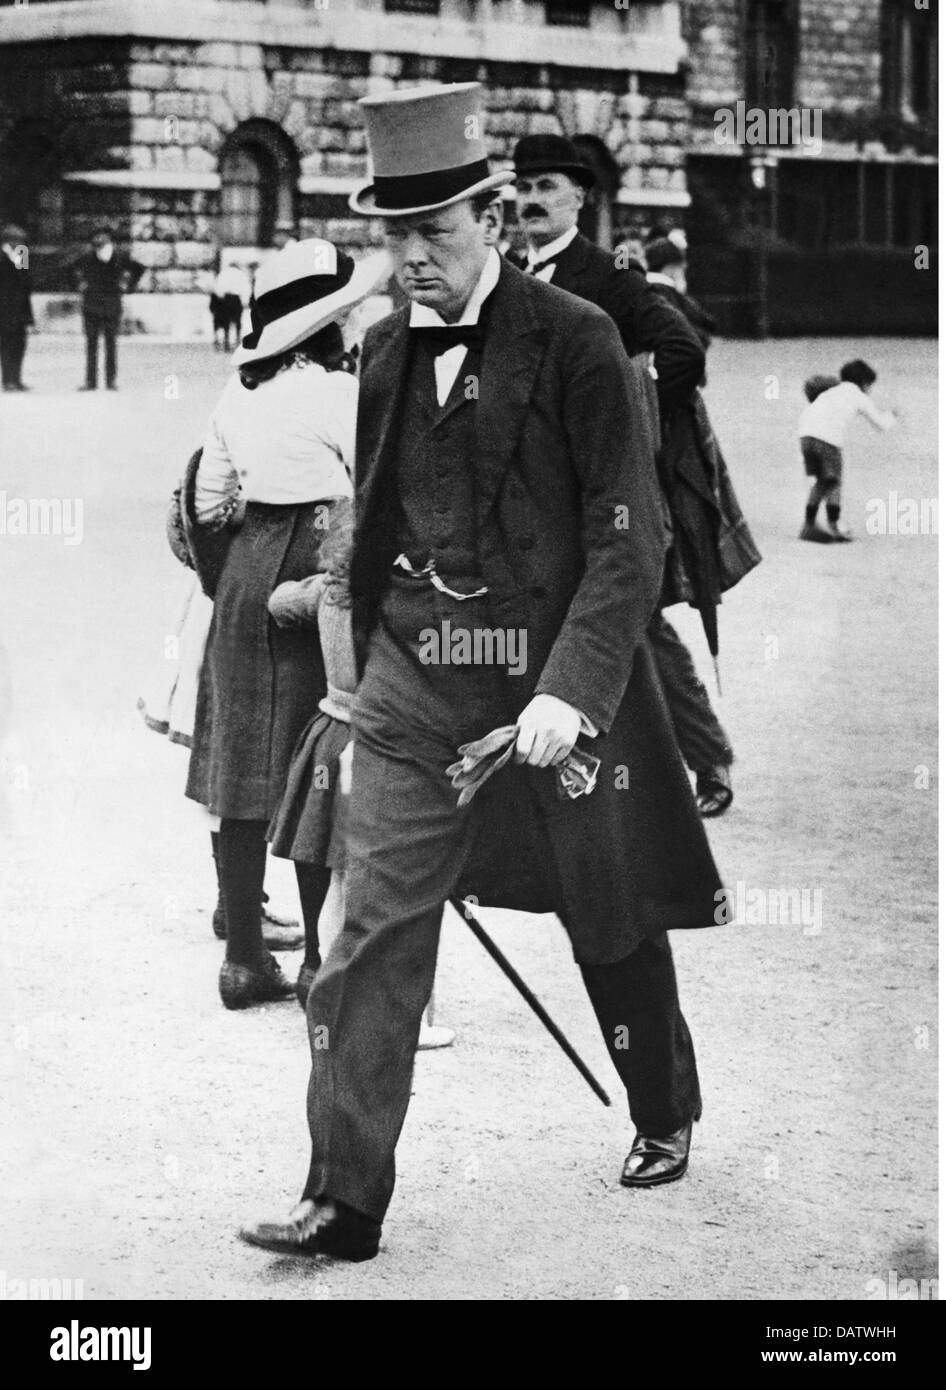 Churchill, Winston Spencer, 30.11.1874 - 24.1.1965, British politician (Cons.), First Lord of the Admiralty 1911 - 1915, full length, London, 1914, Stock Photo